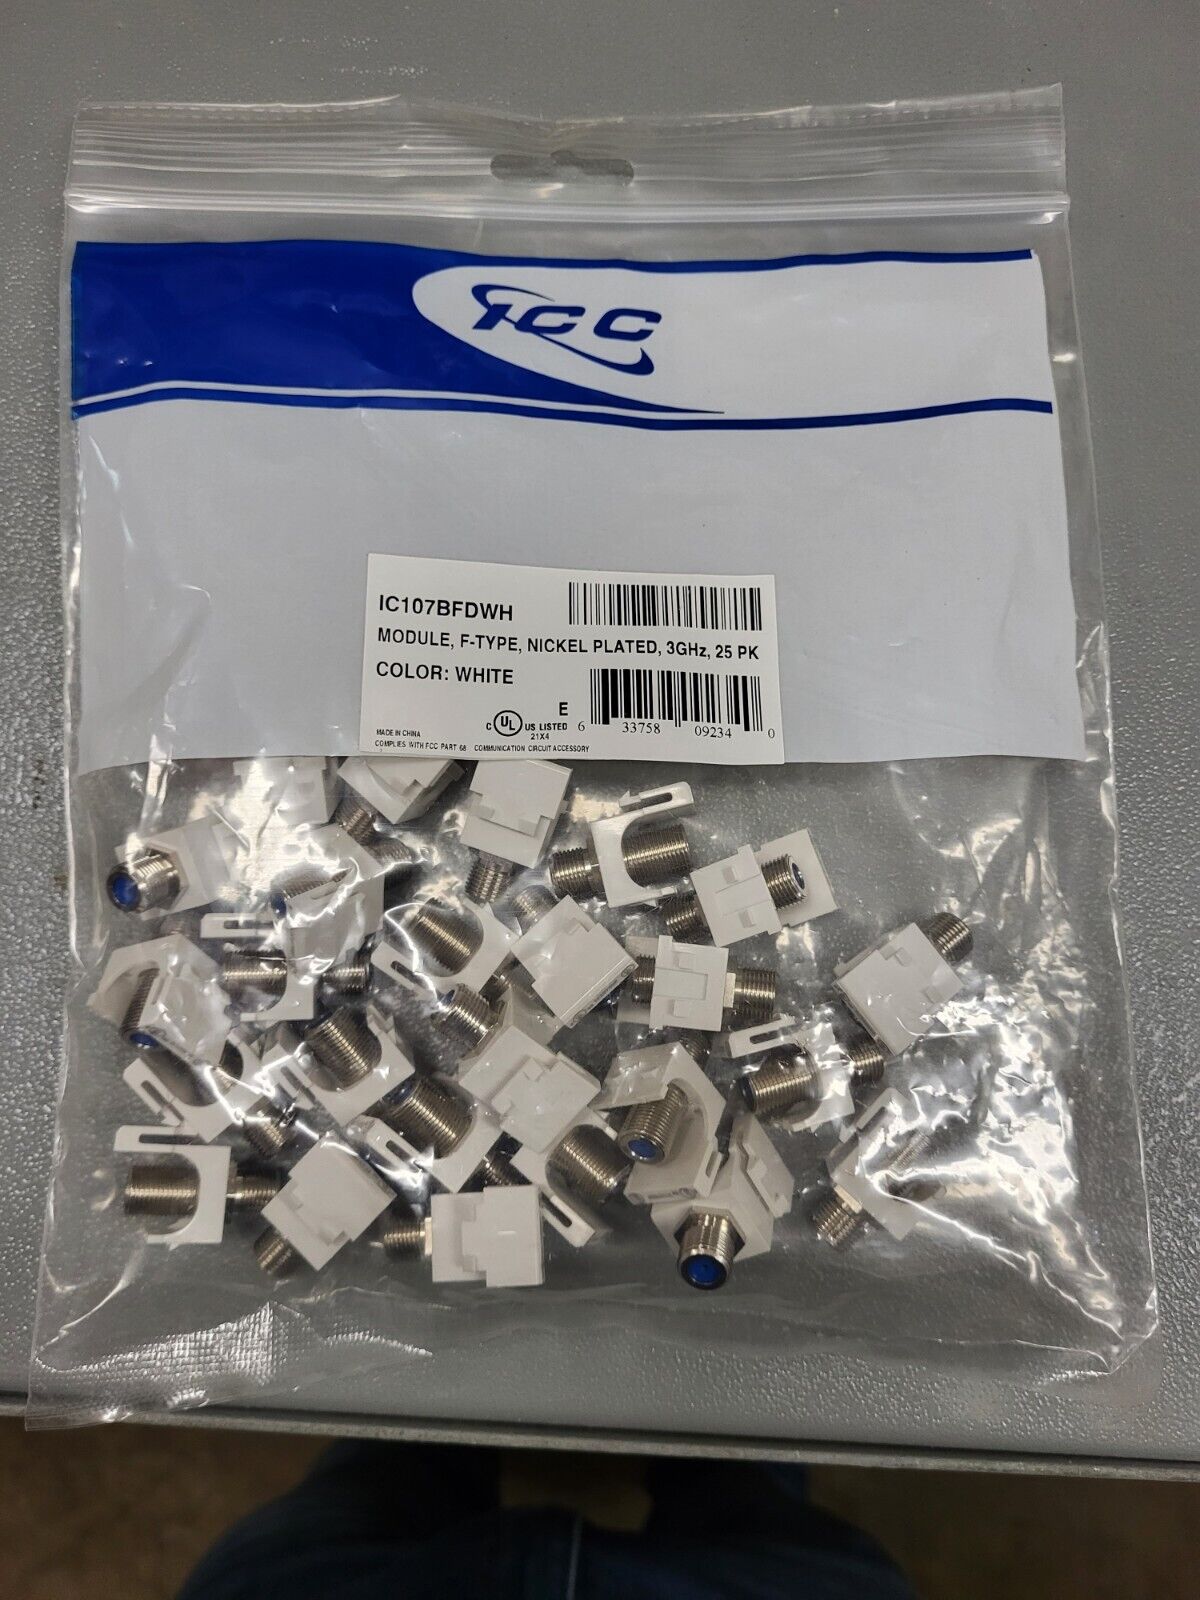 ICC IC107BFDWH Module, F-Type Nickel Plated 3Ghz, 25Pk  